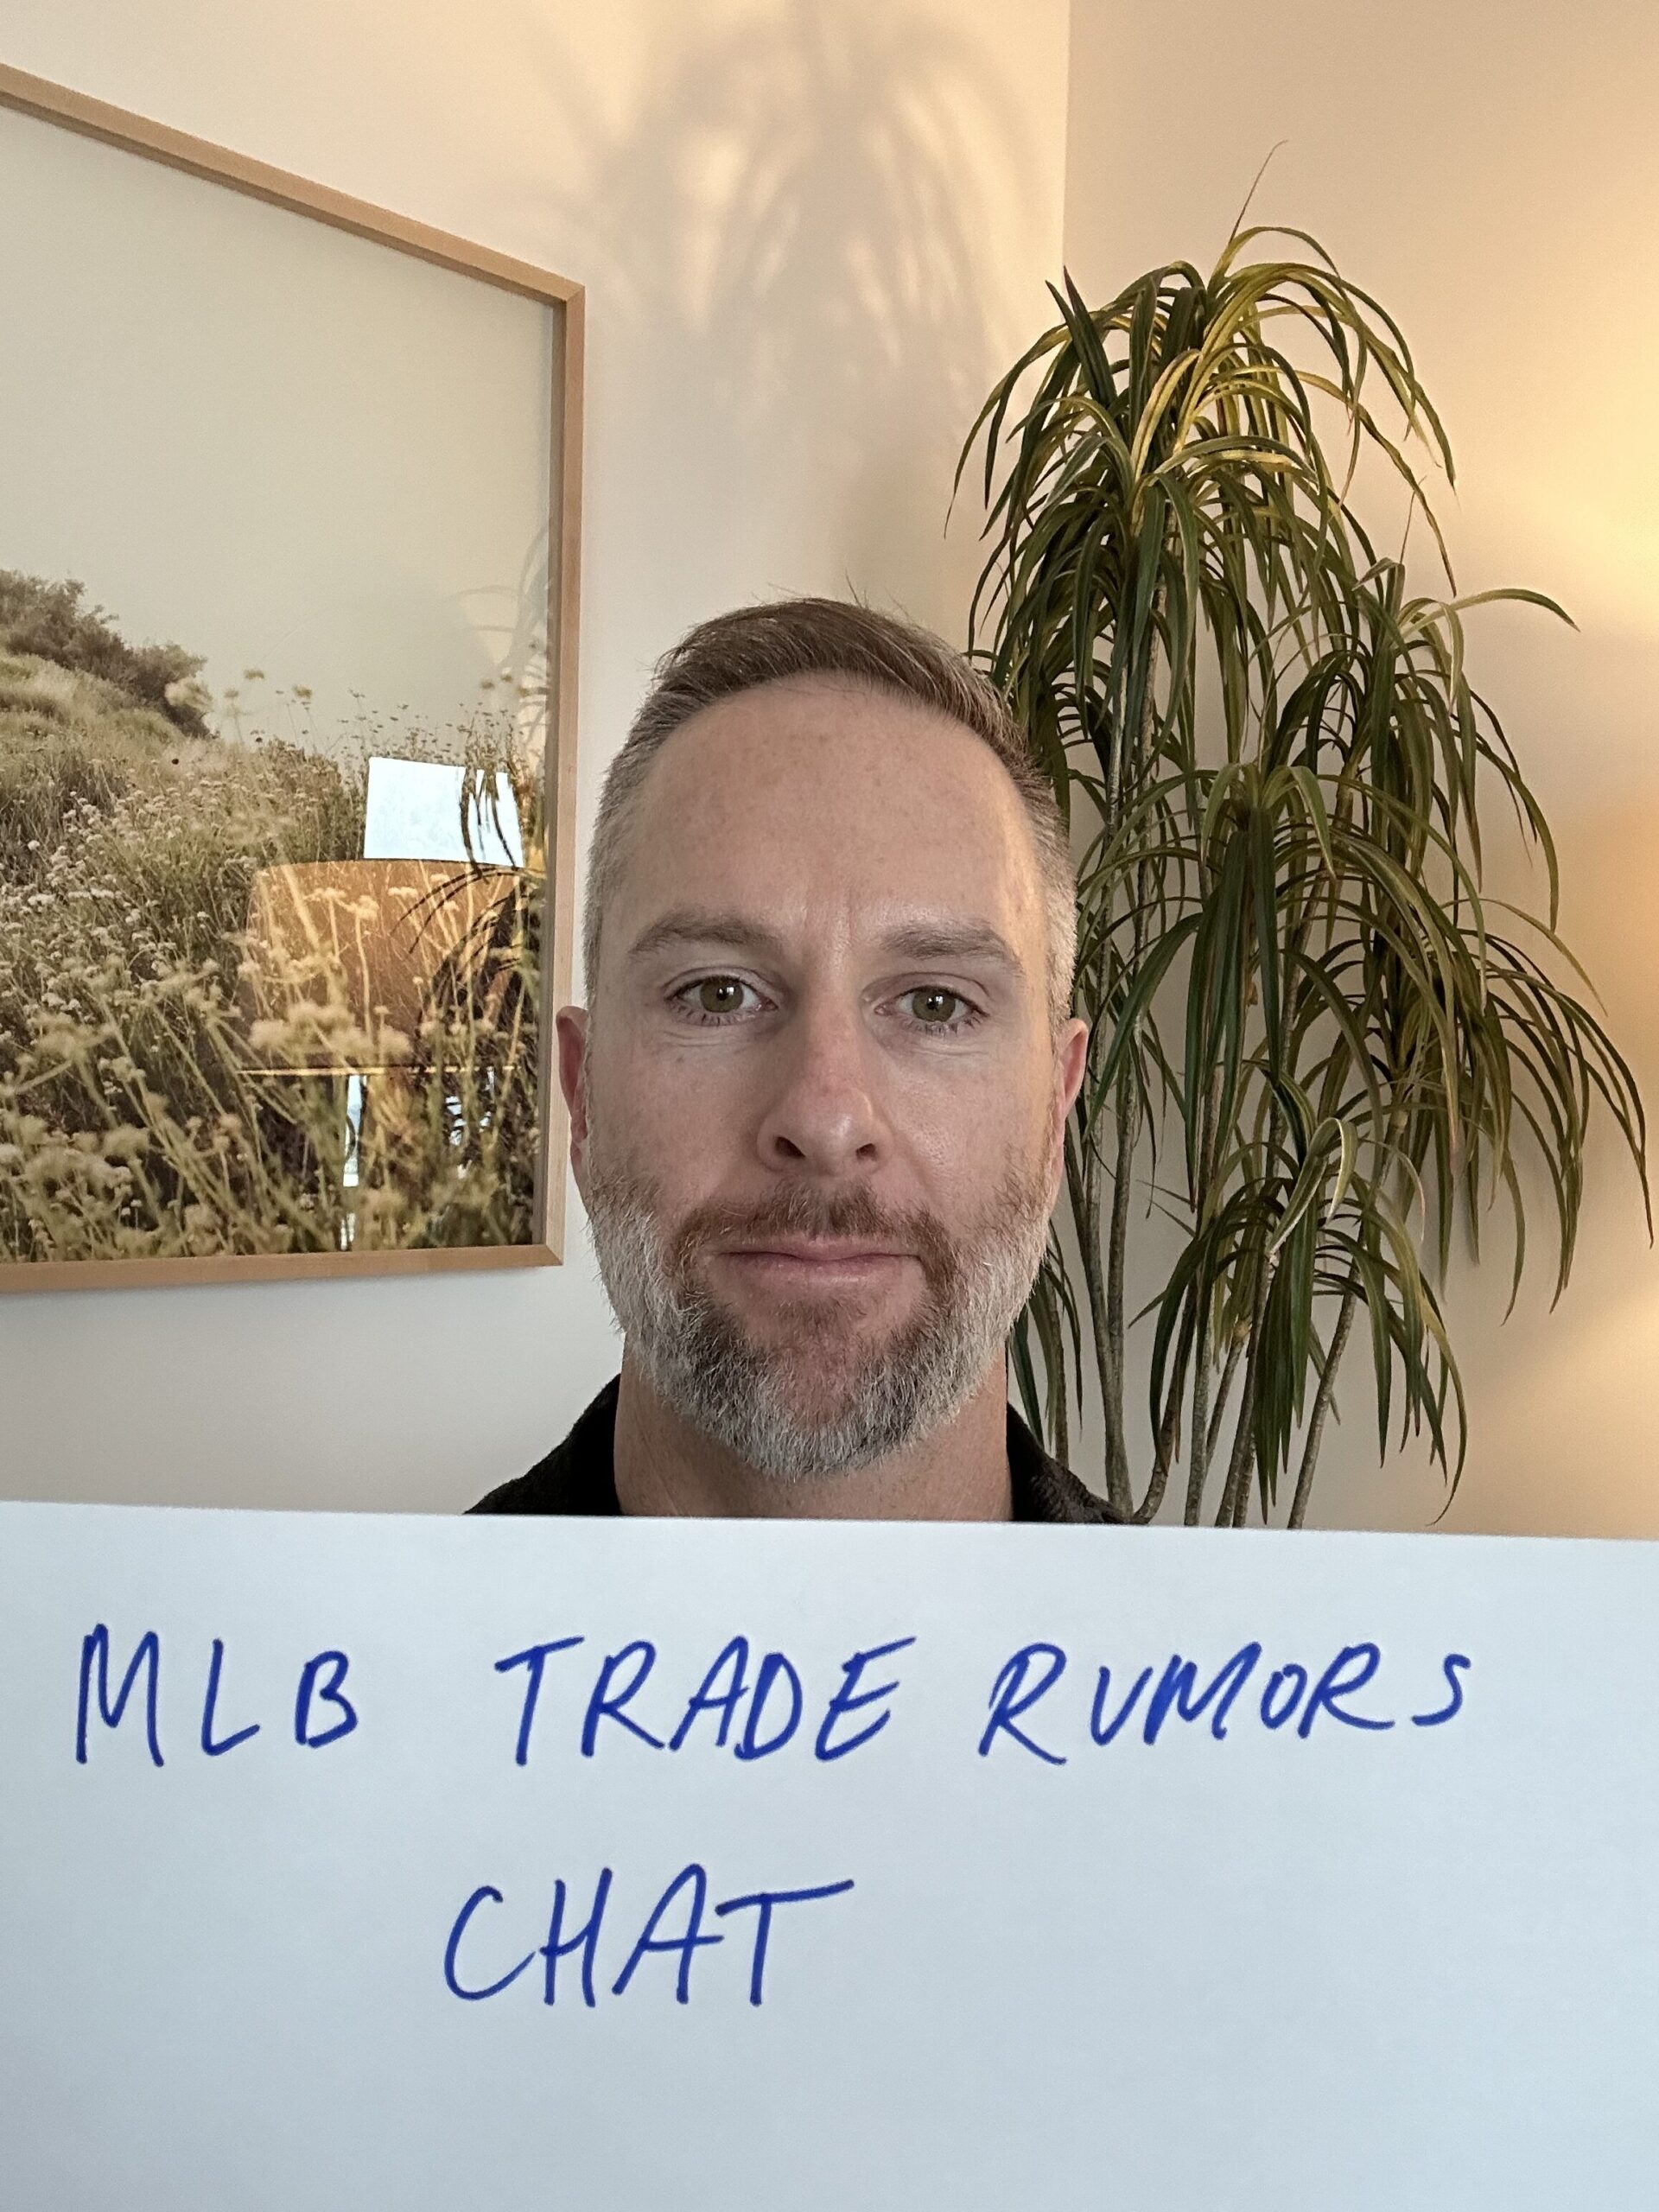 Read The Transcript Of Our Chat Hosted By Former MLB Hitting Coach